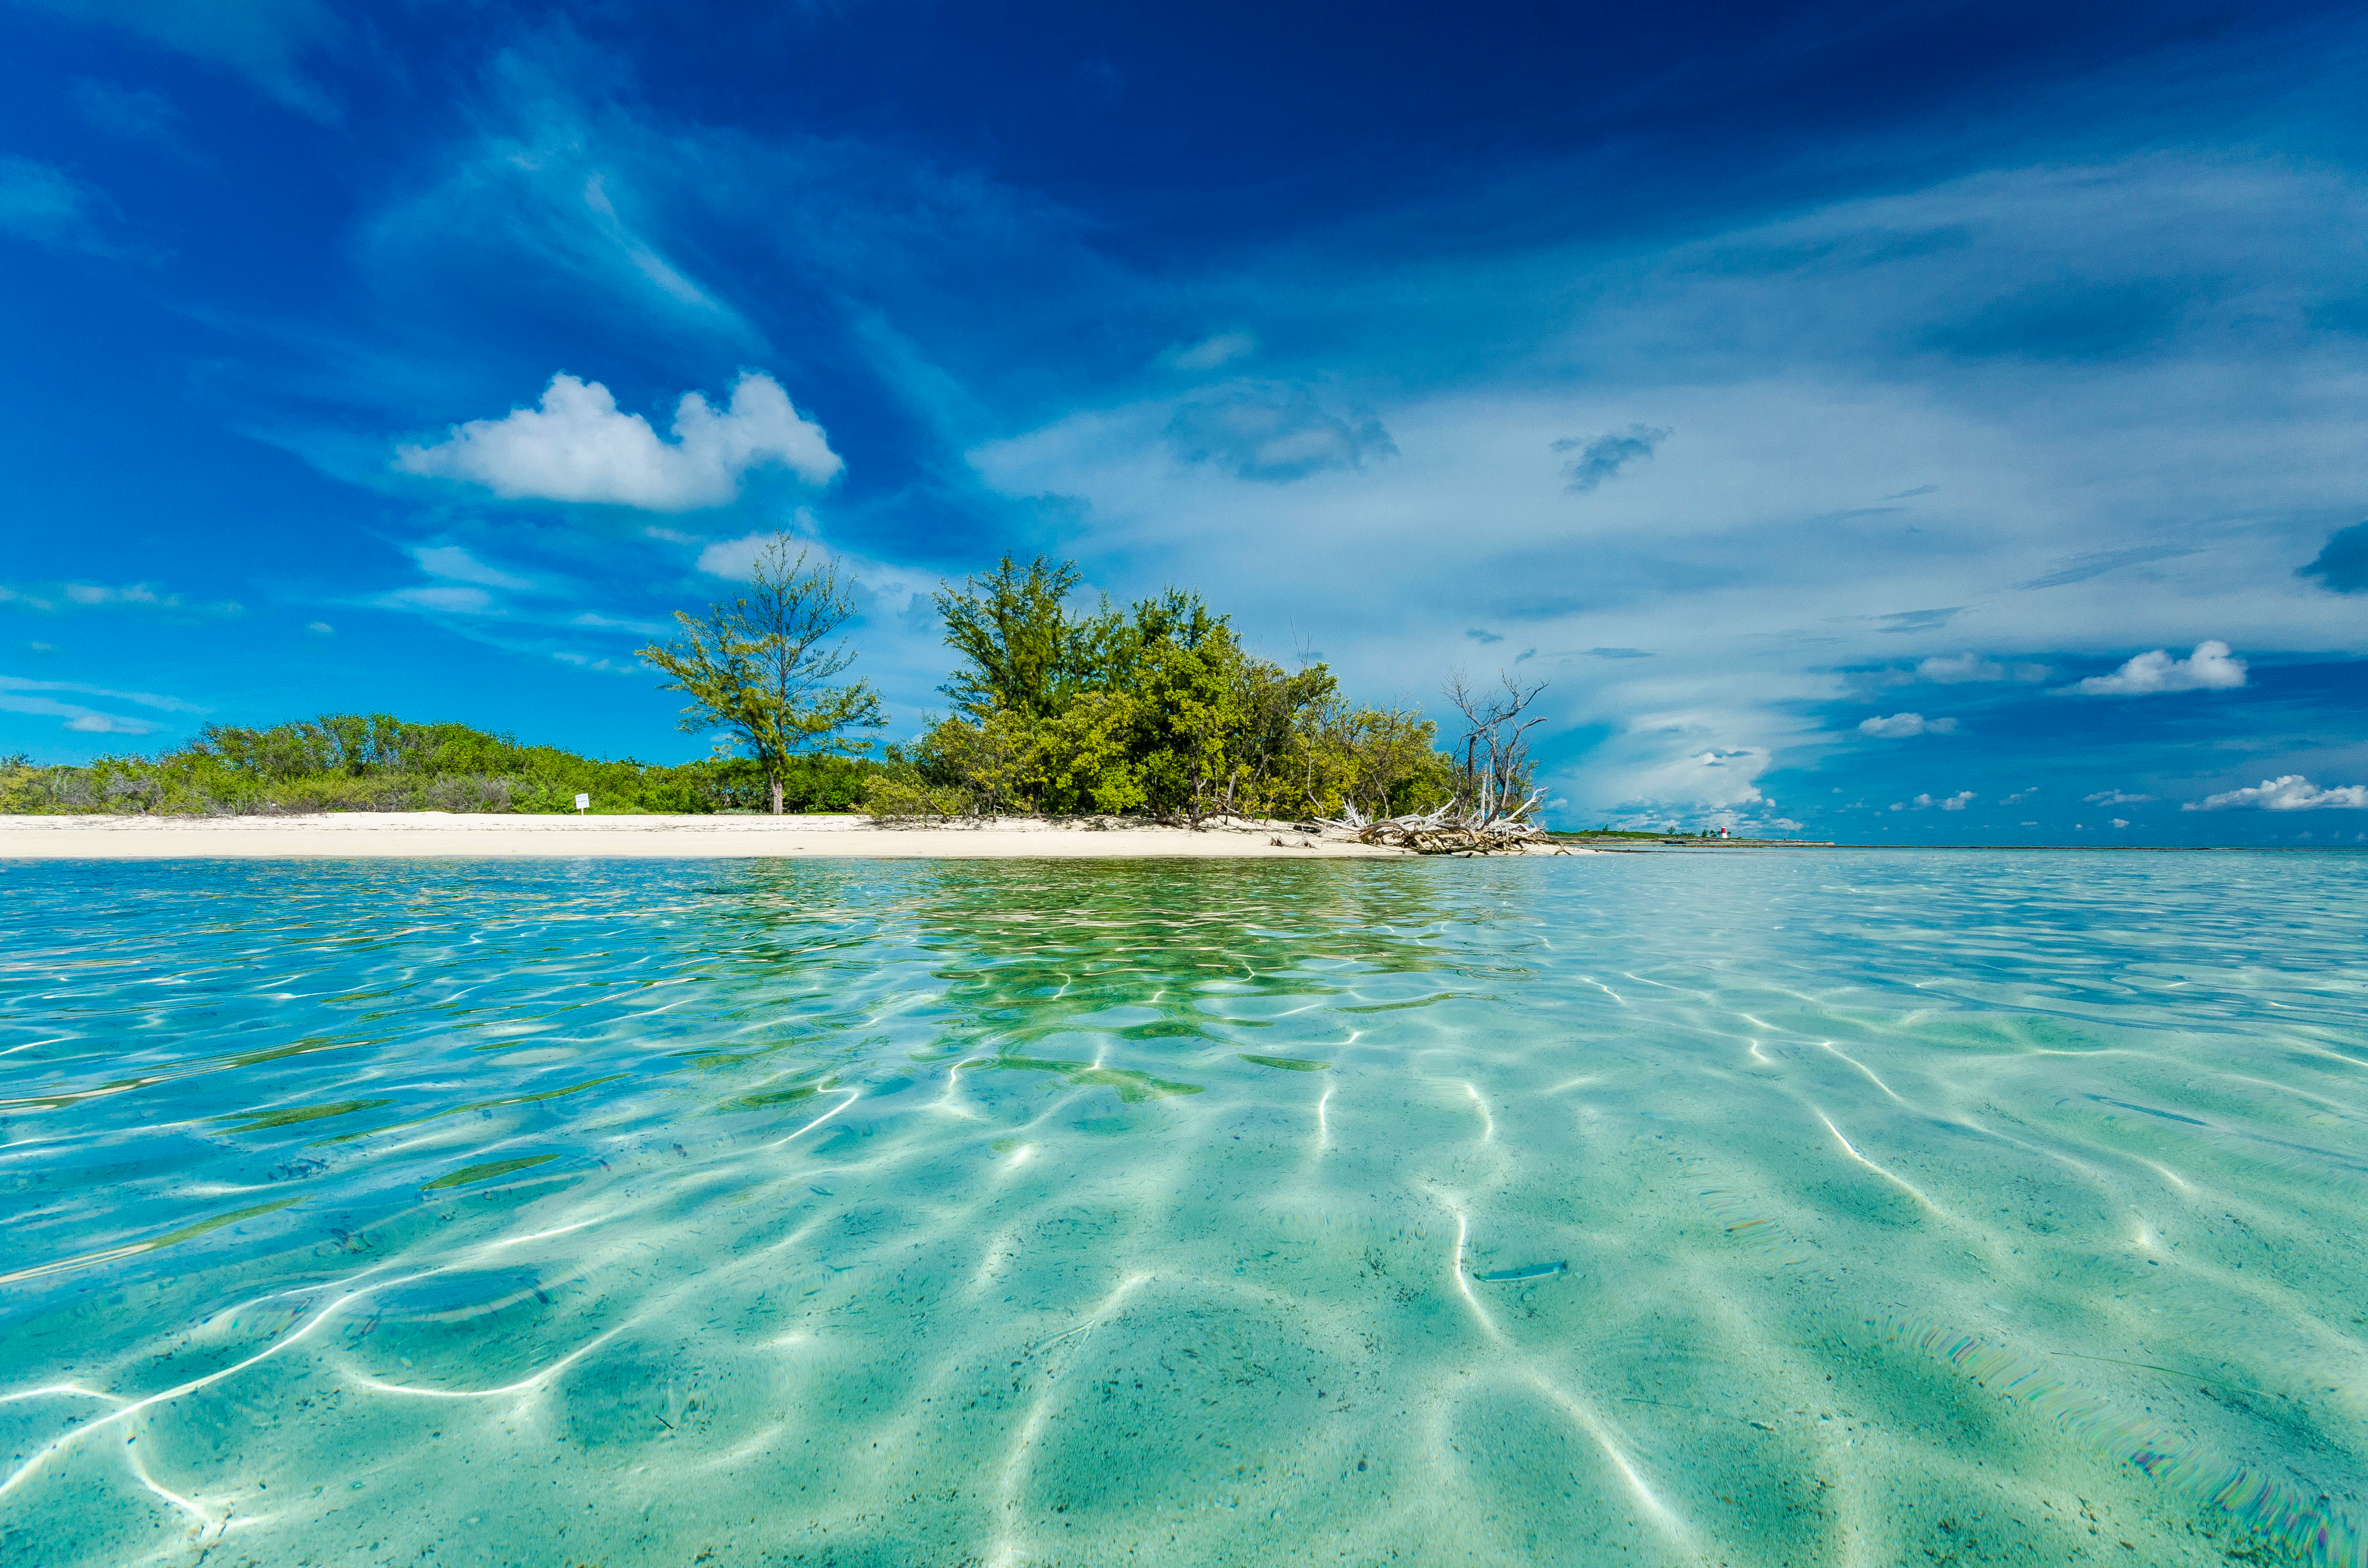 Clear waters of an islet in Bimini, a port of call on our 2022 summer needlework cruise